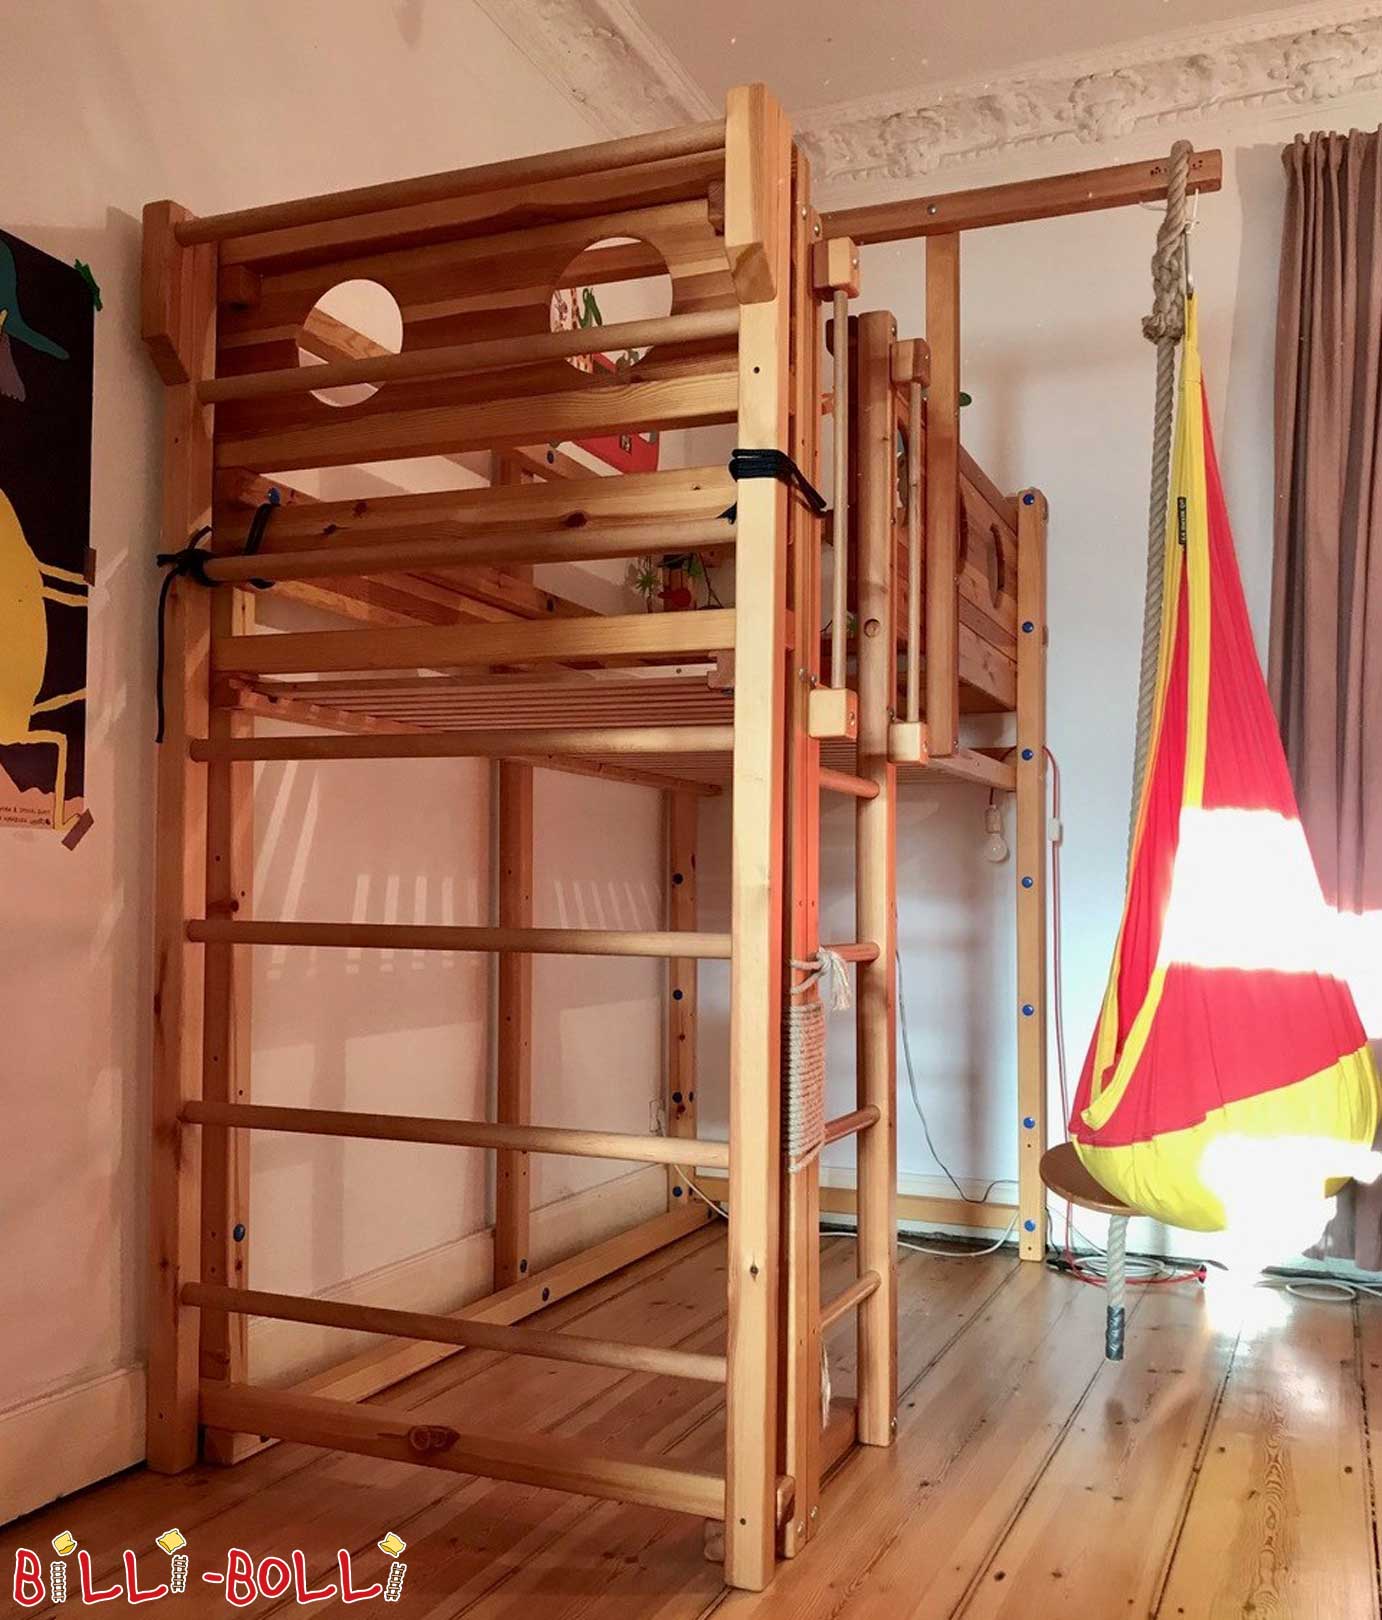 Growing loft bed, pine-oiled with many accessories in Hamburg (Category: second hand loft bed)